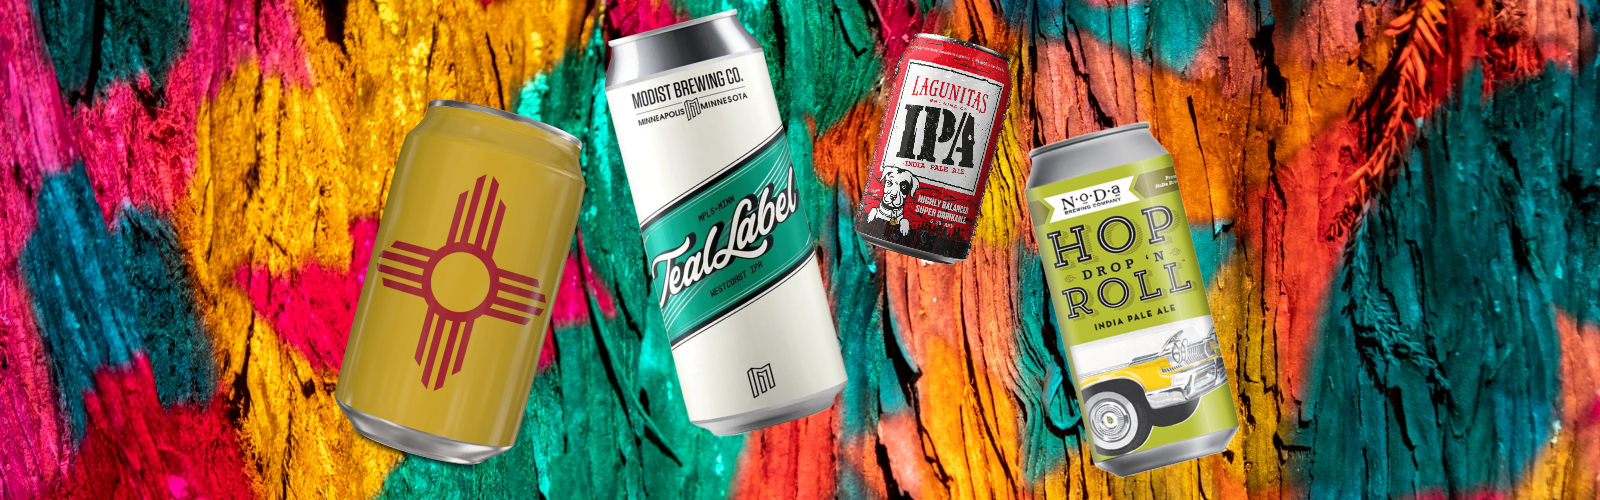 Best Coast IPAs To Right Told By Experts